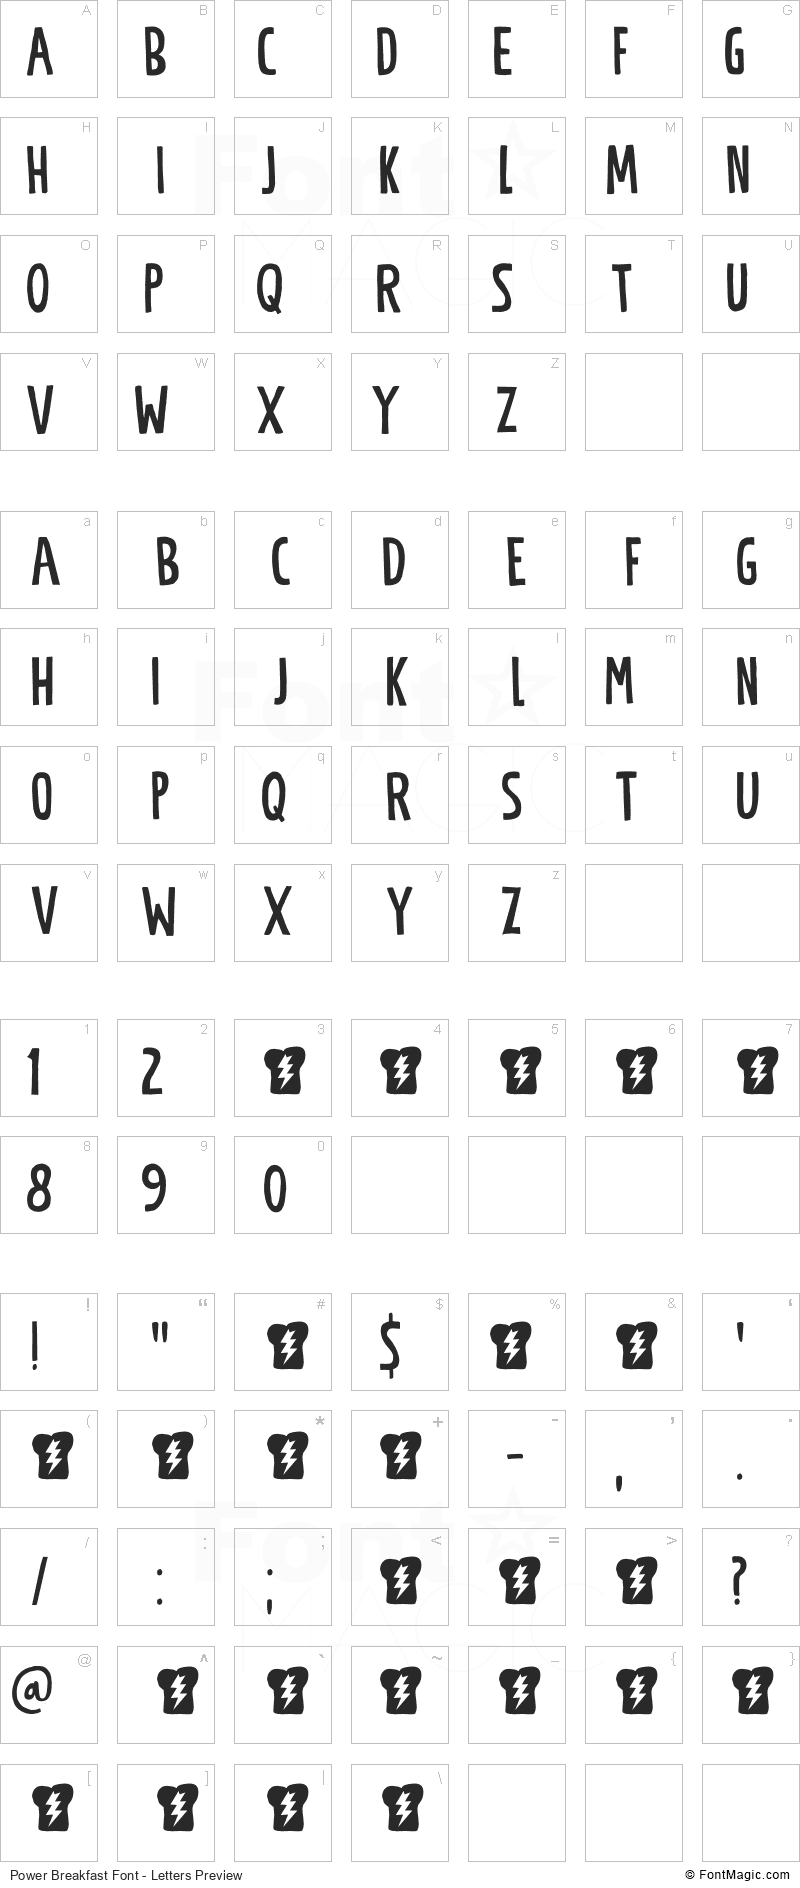 Power Breakfast Font - All Latters Preview Chart